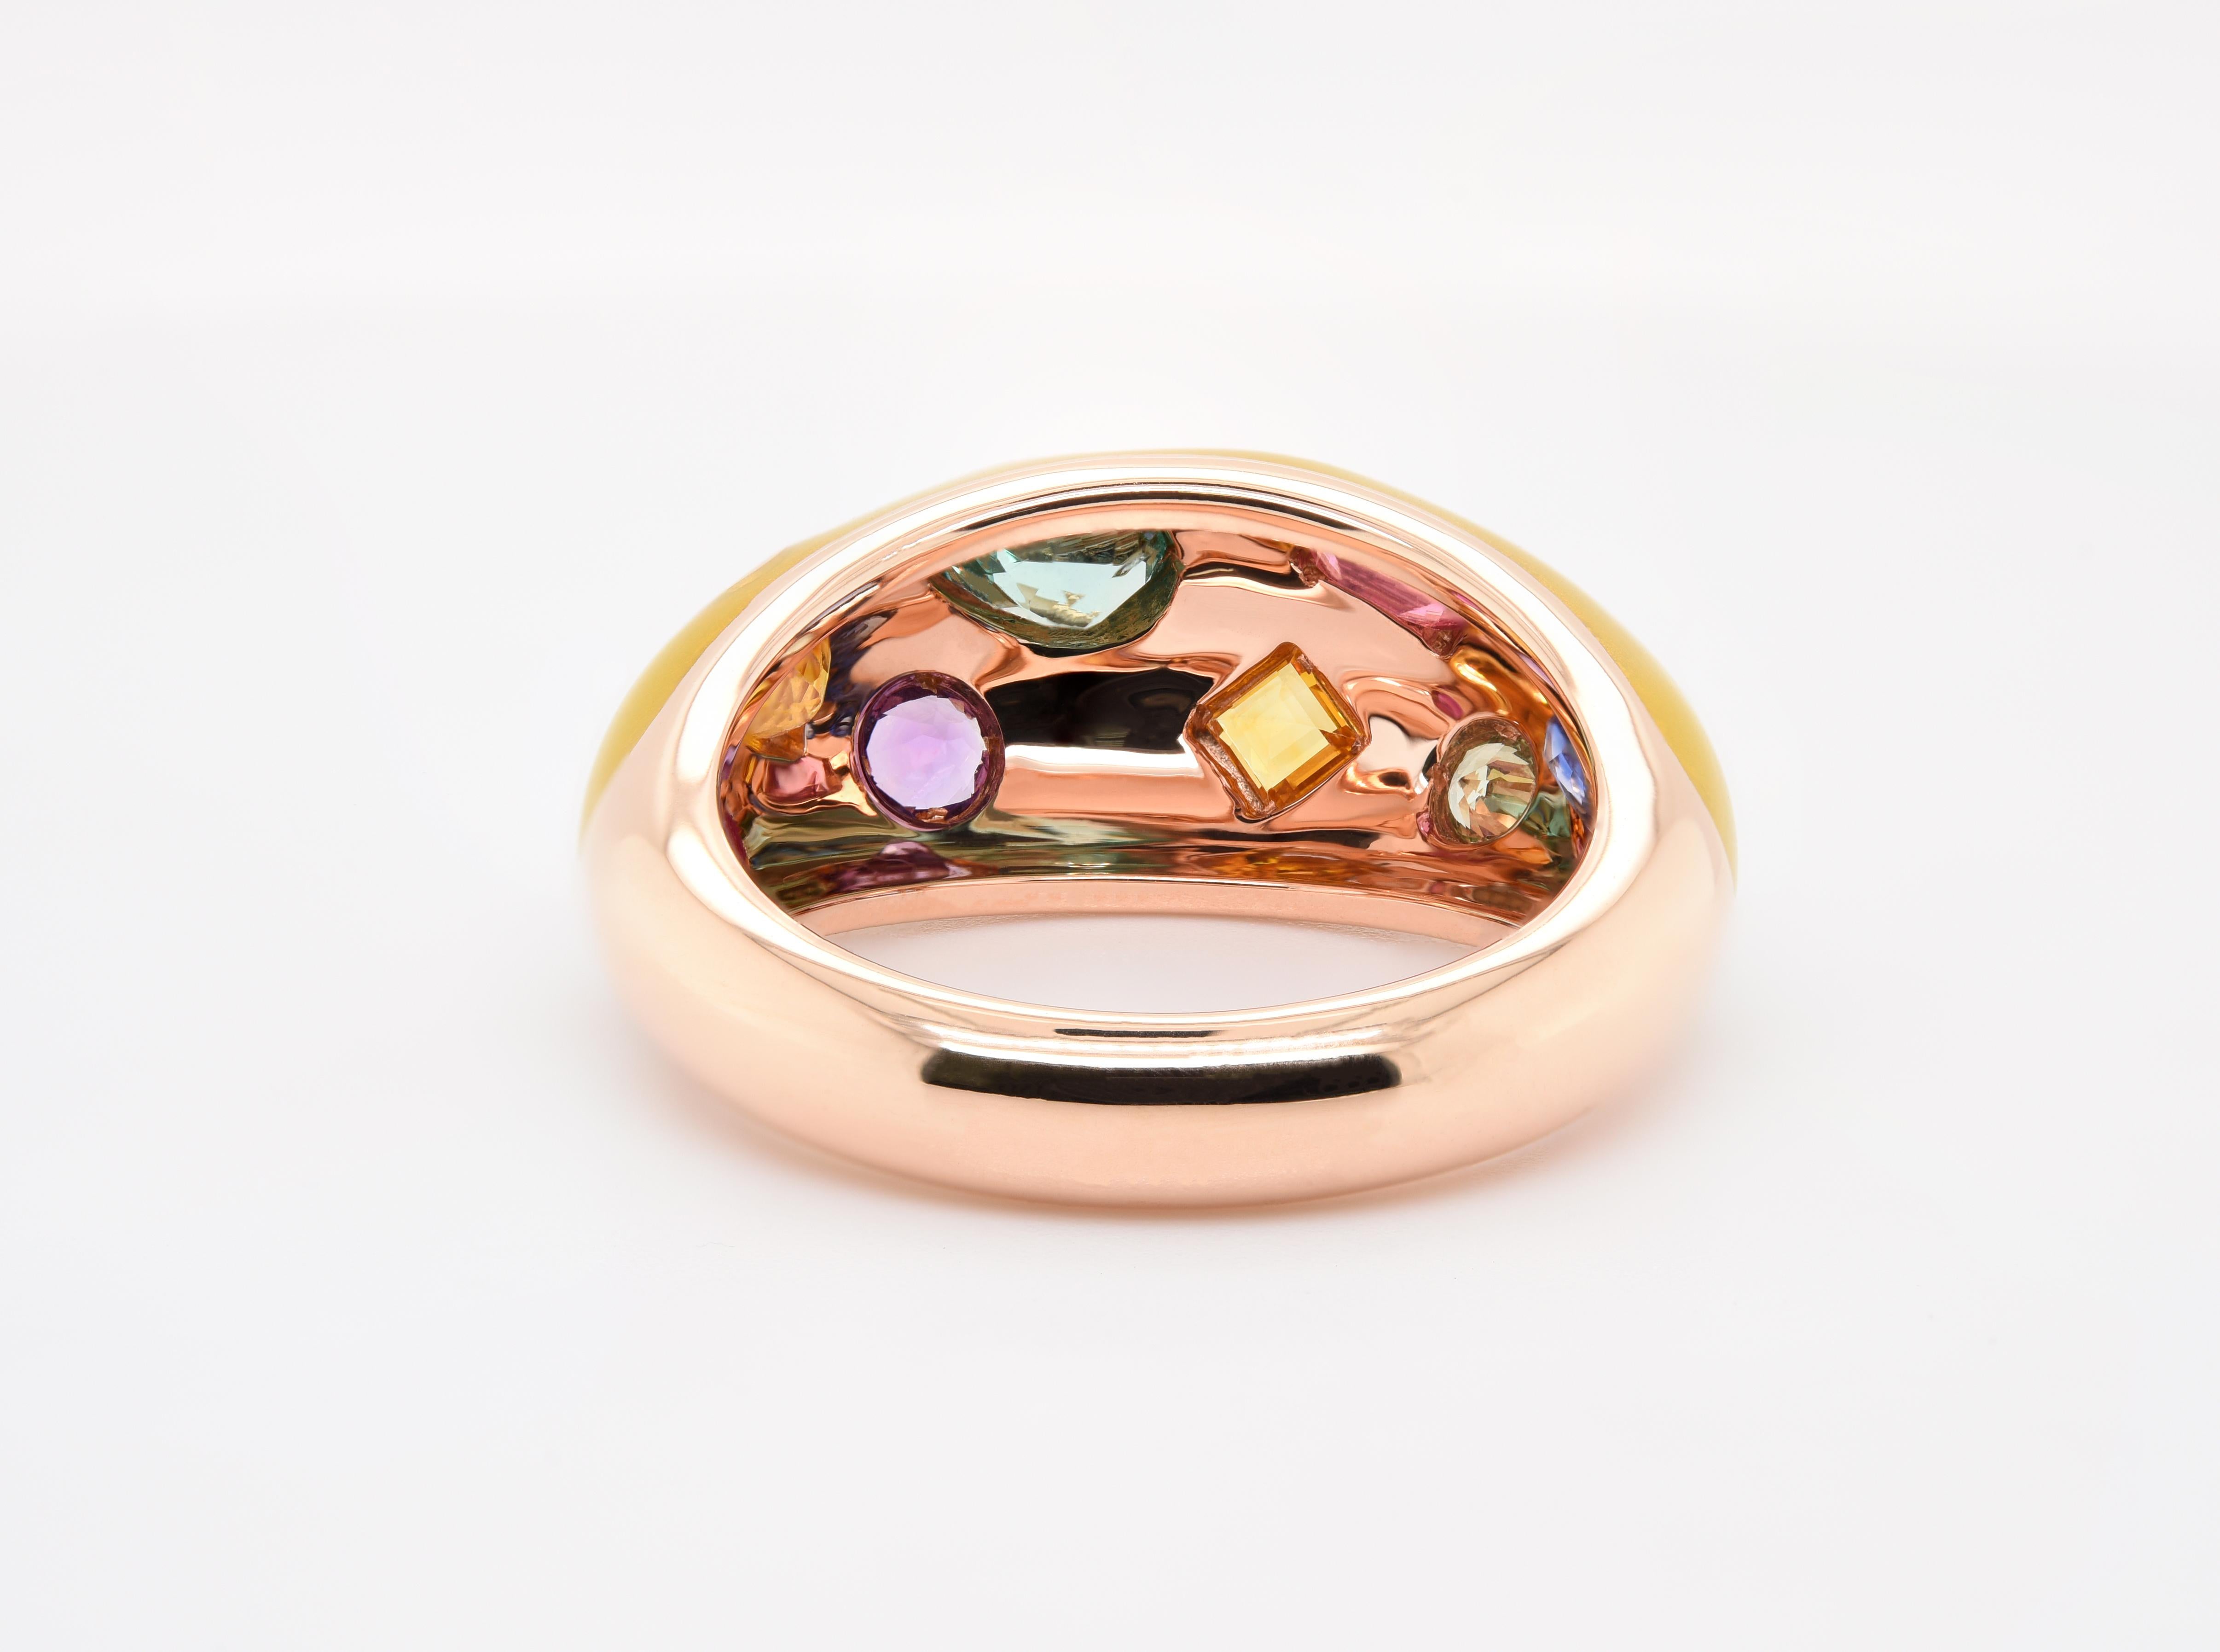 JAG New York created this one of a kind Dome Ring with Yellow Ceramic, Sapphires, Amethysts & Tourmalines for a total gem weight of 2 carats and made in 9.2 grams of 18k Rose Gold. We can create your Dome Ring with custom ceramic and gemstones, just